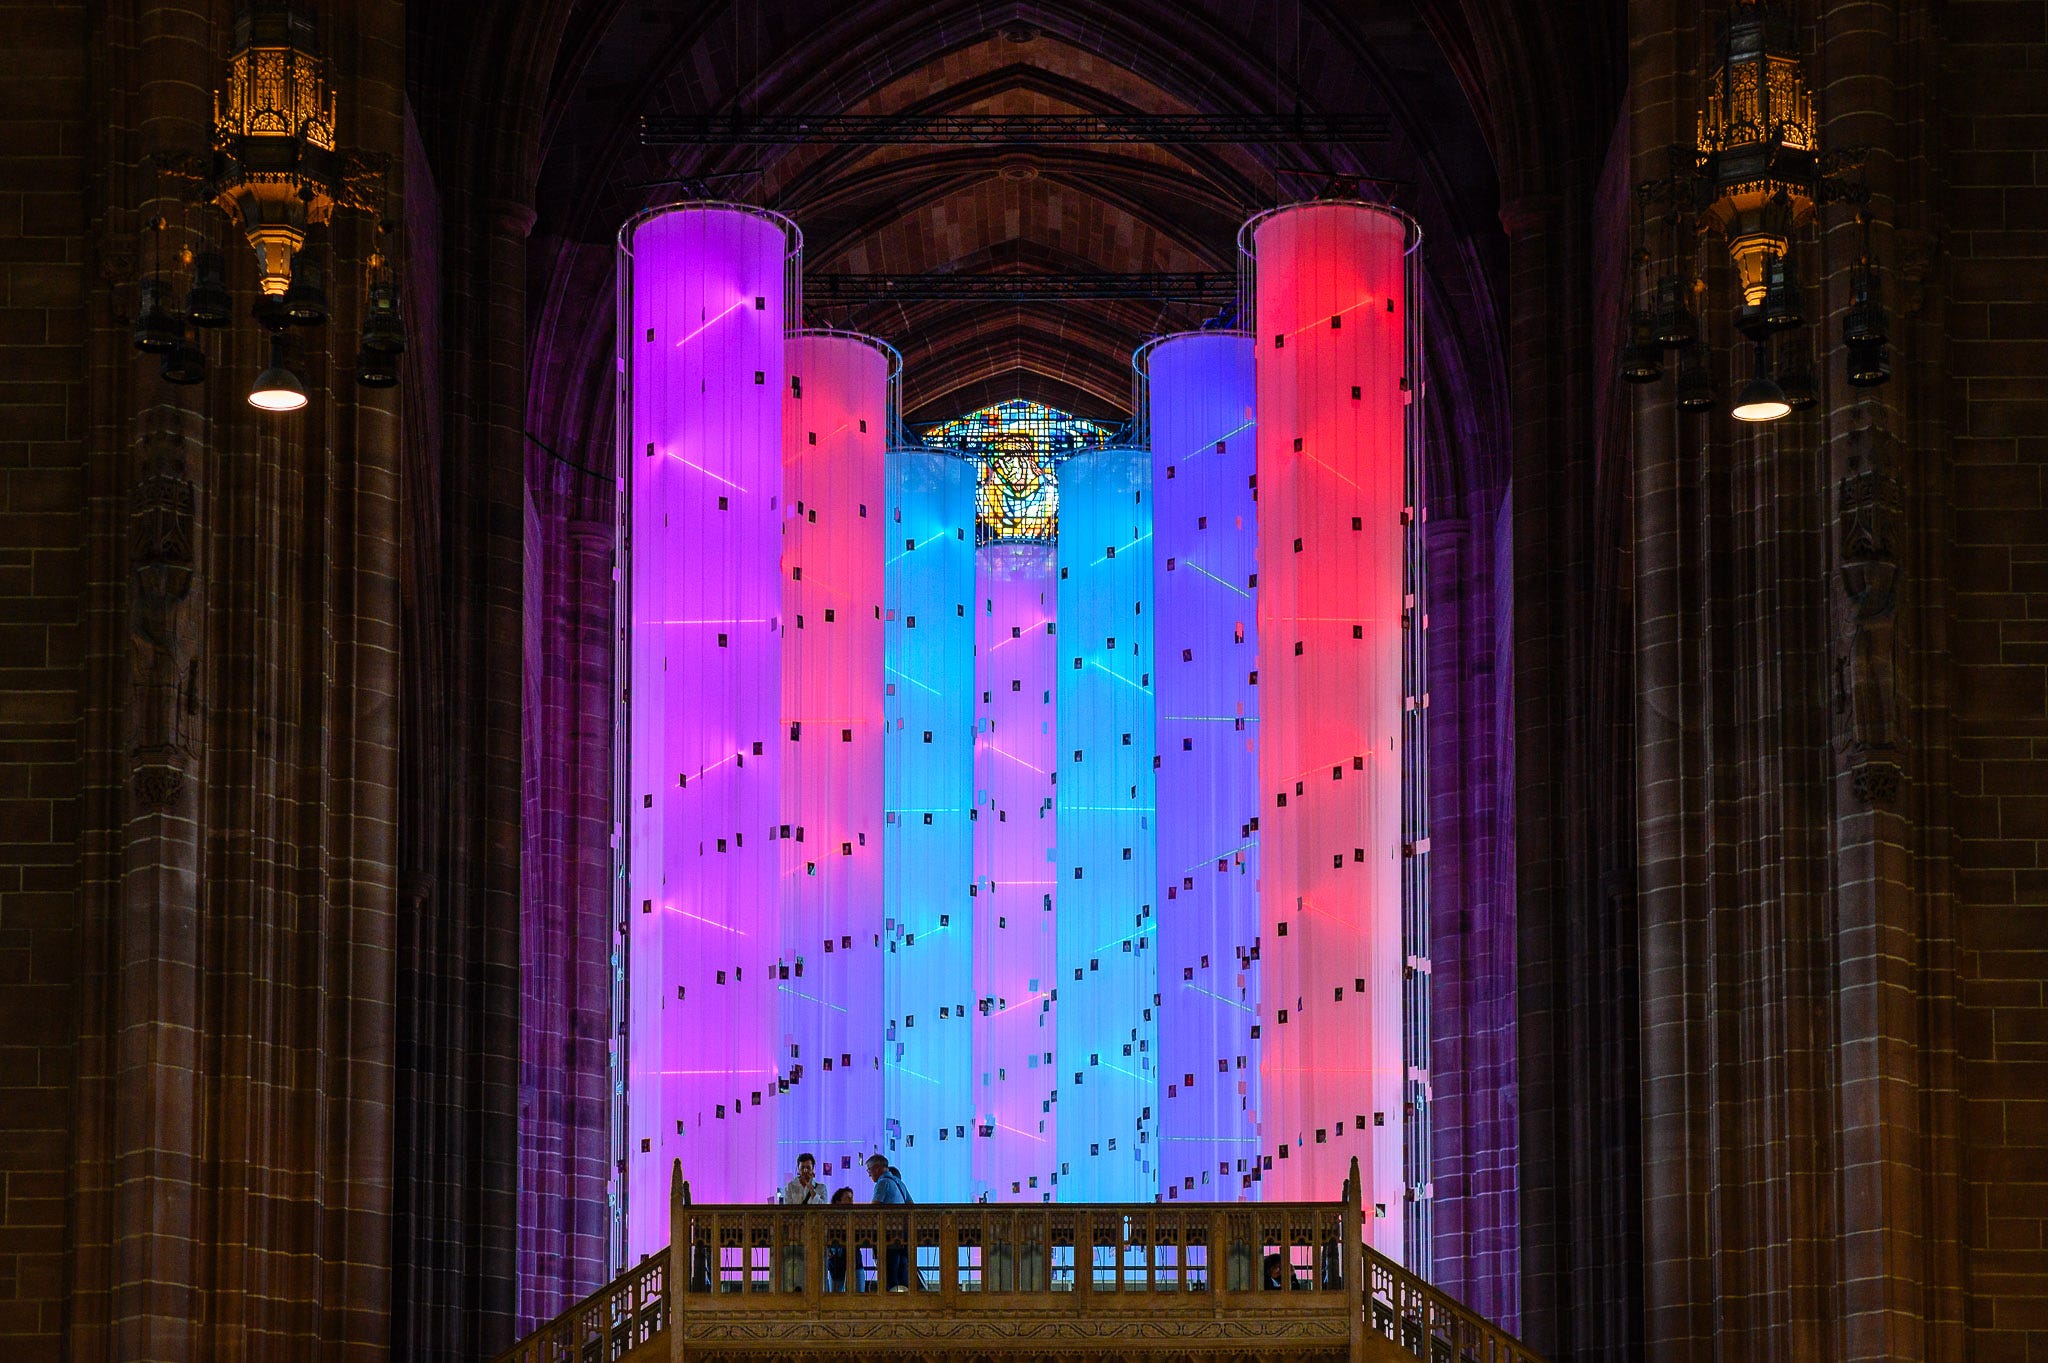 Standing beneath a bridge in the cathedral there are people crossing it to get a good view of the rainbow columns. 